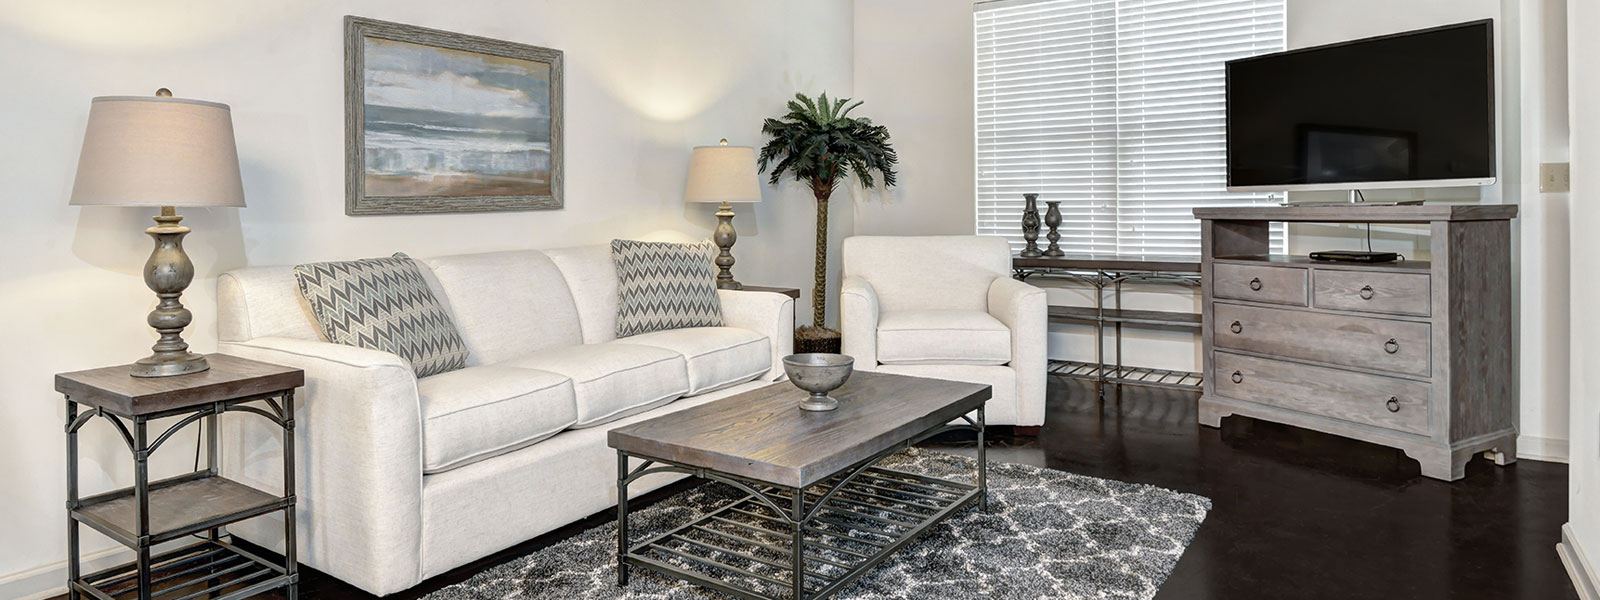 Rent Furniture in Anderson - Apartments